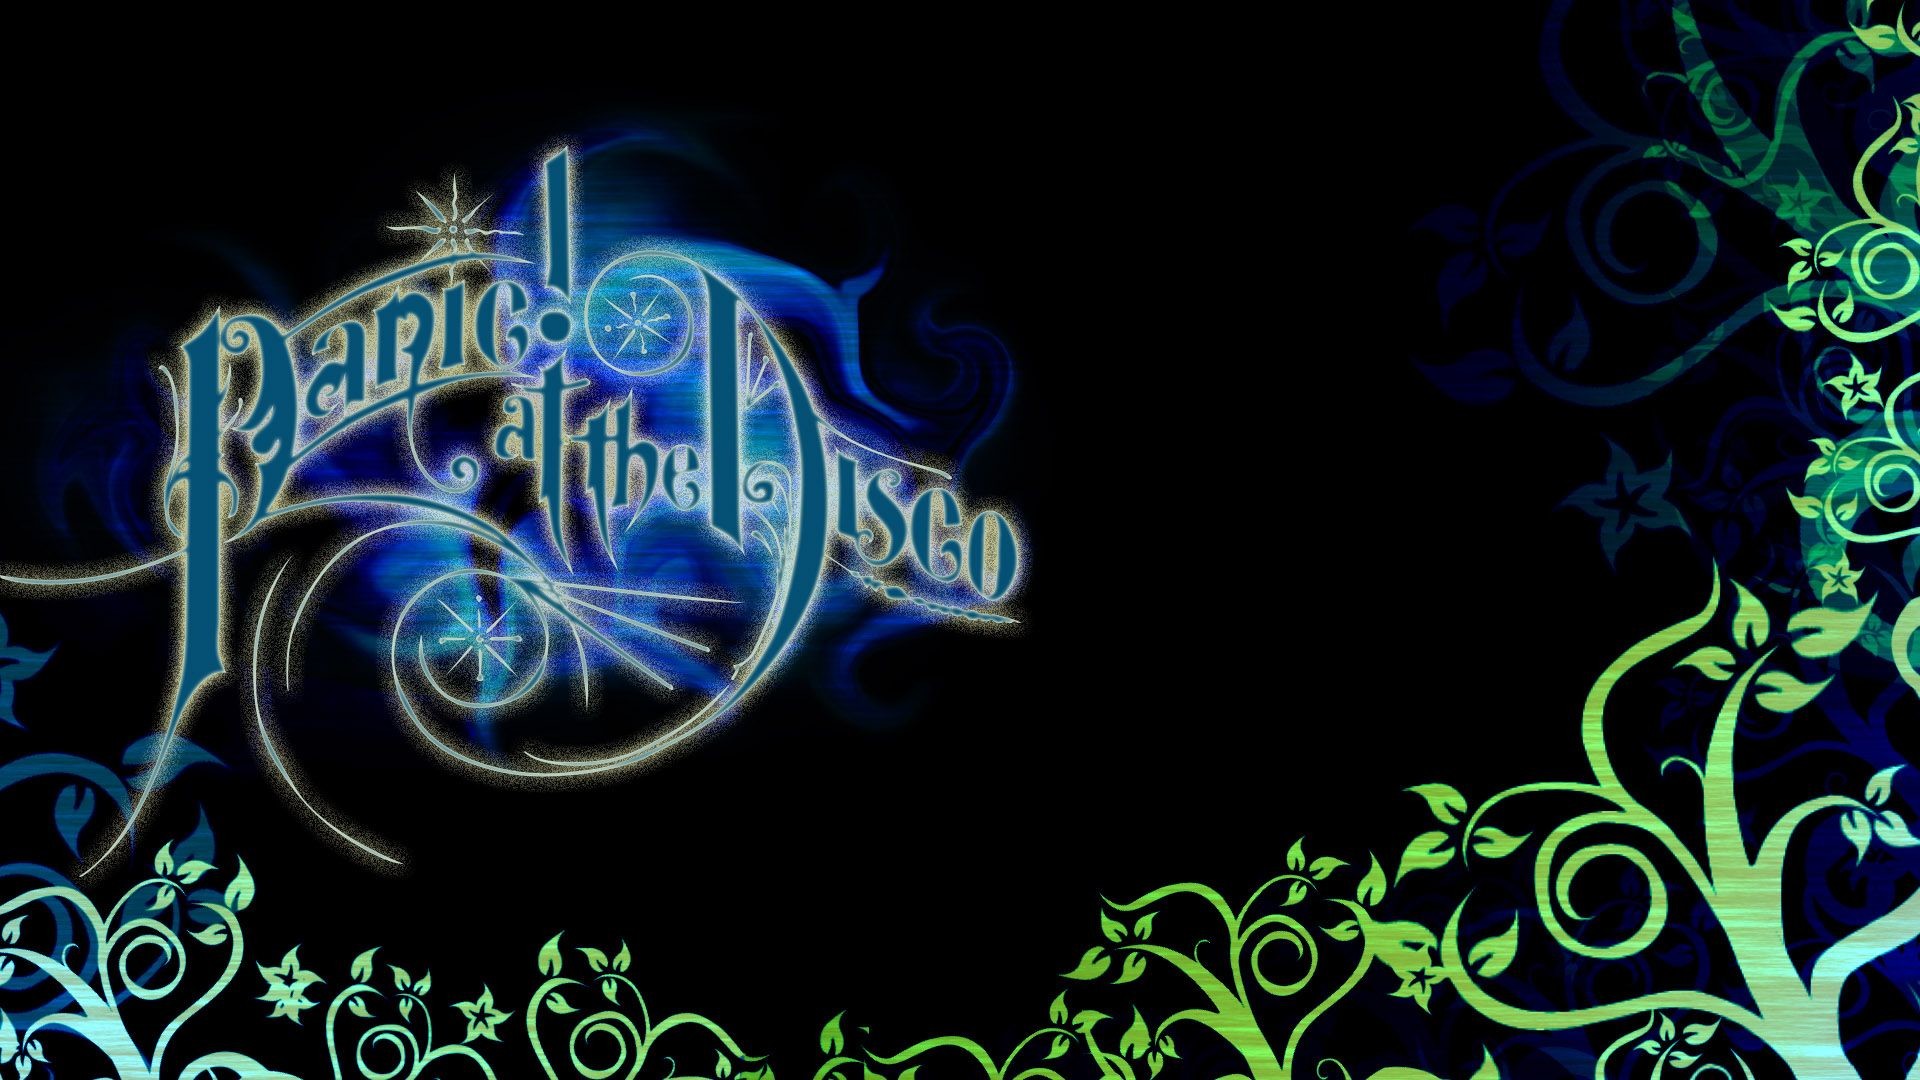 1920x1080 ... Panic At The Disco #529641 | Full HD Widescreen wallpapers for ...